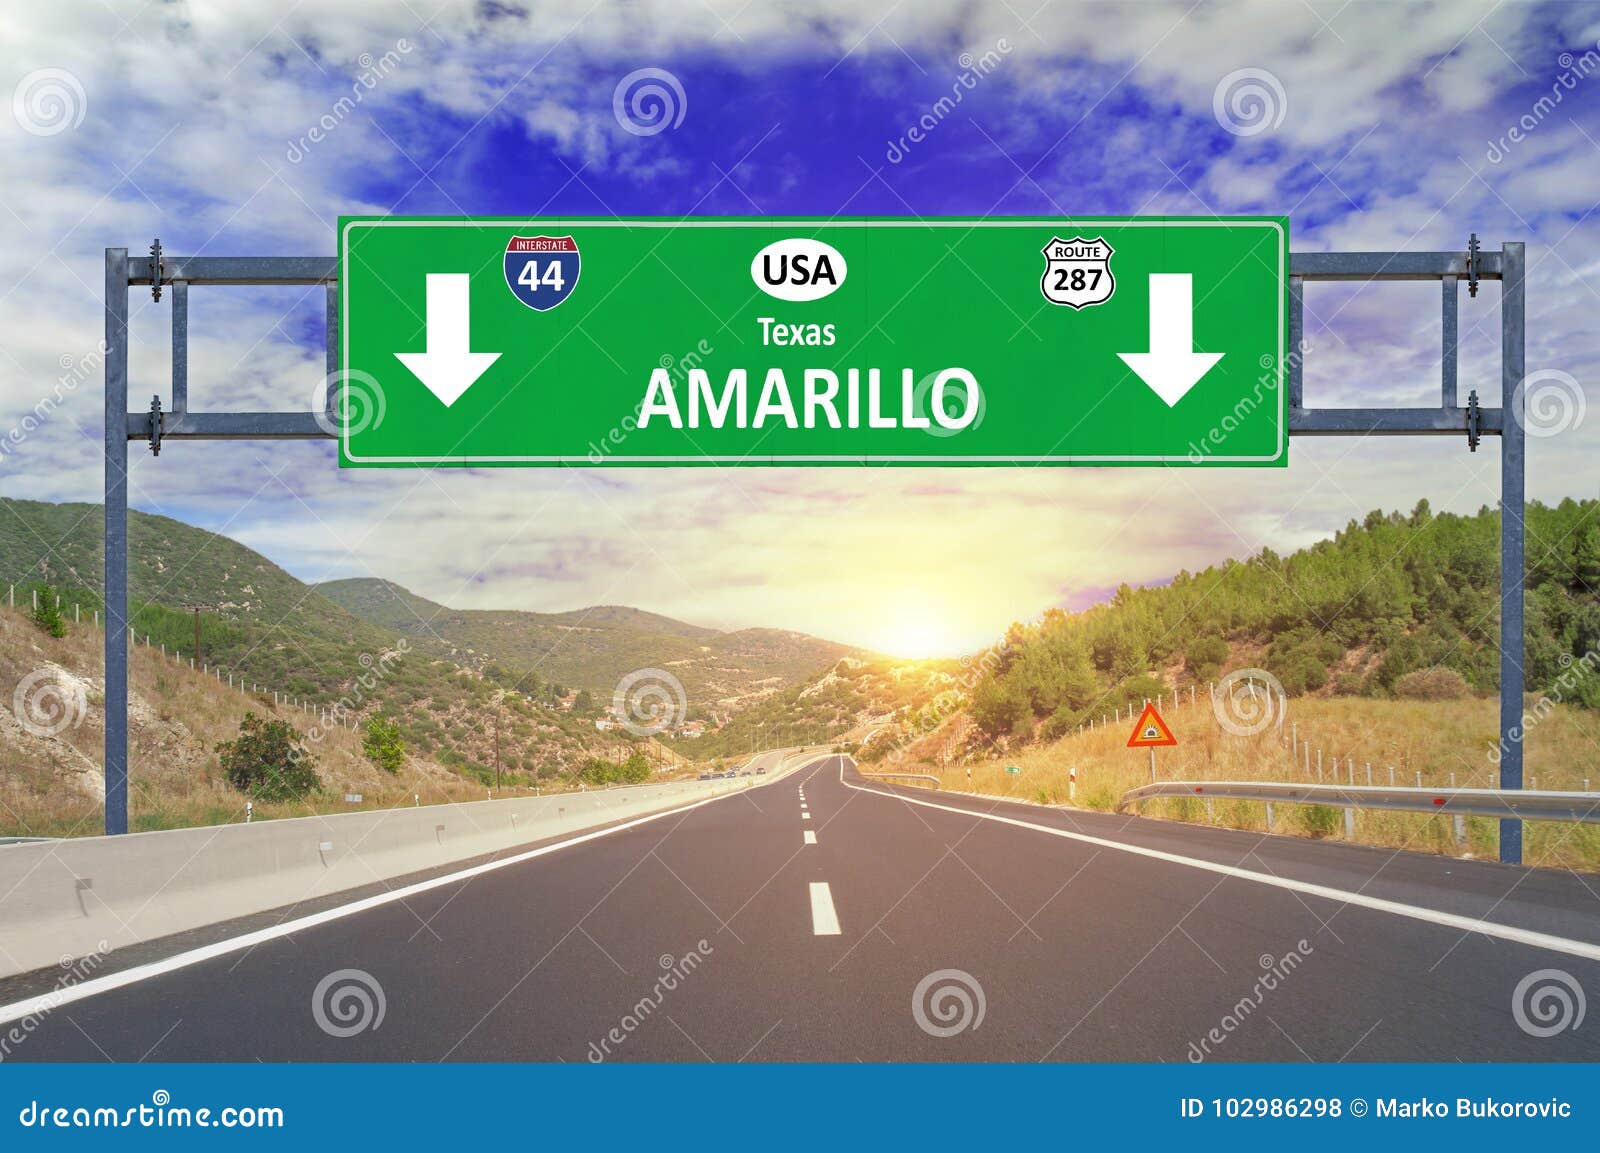 us city amarillo road sign on highway